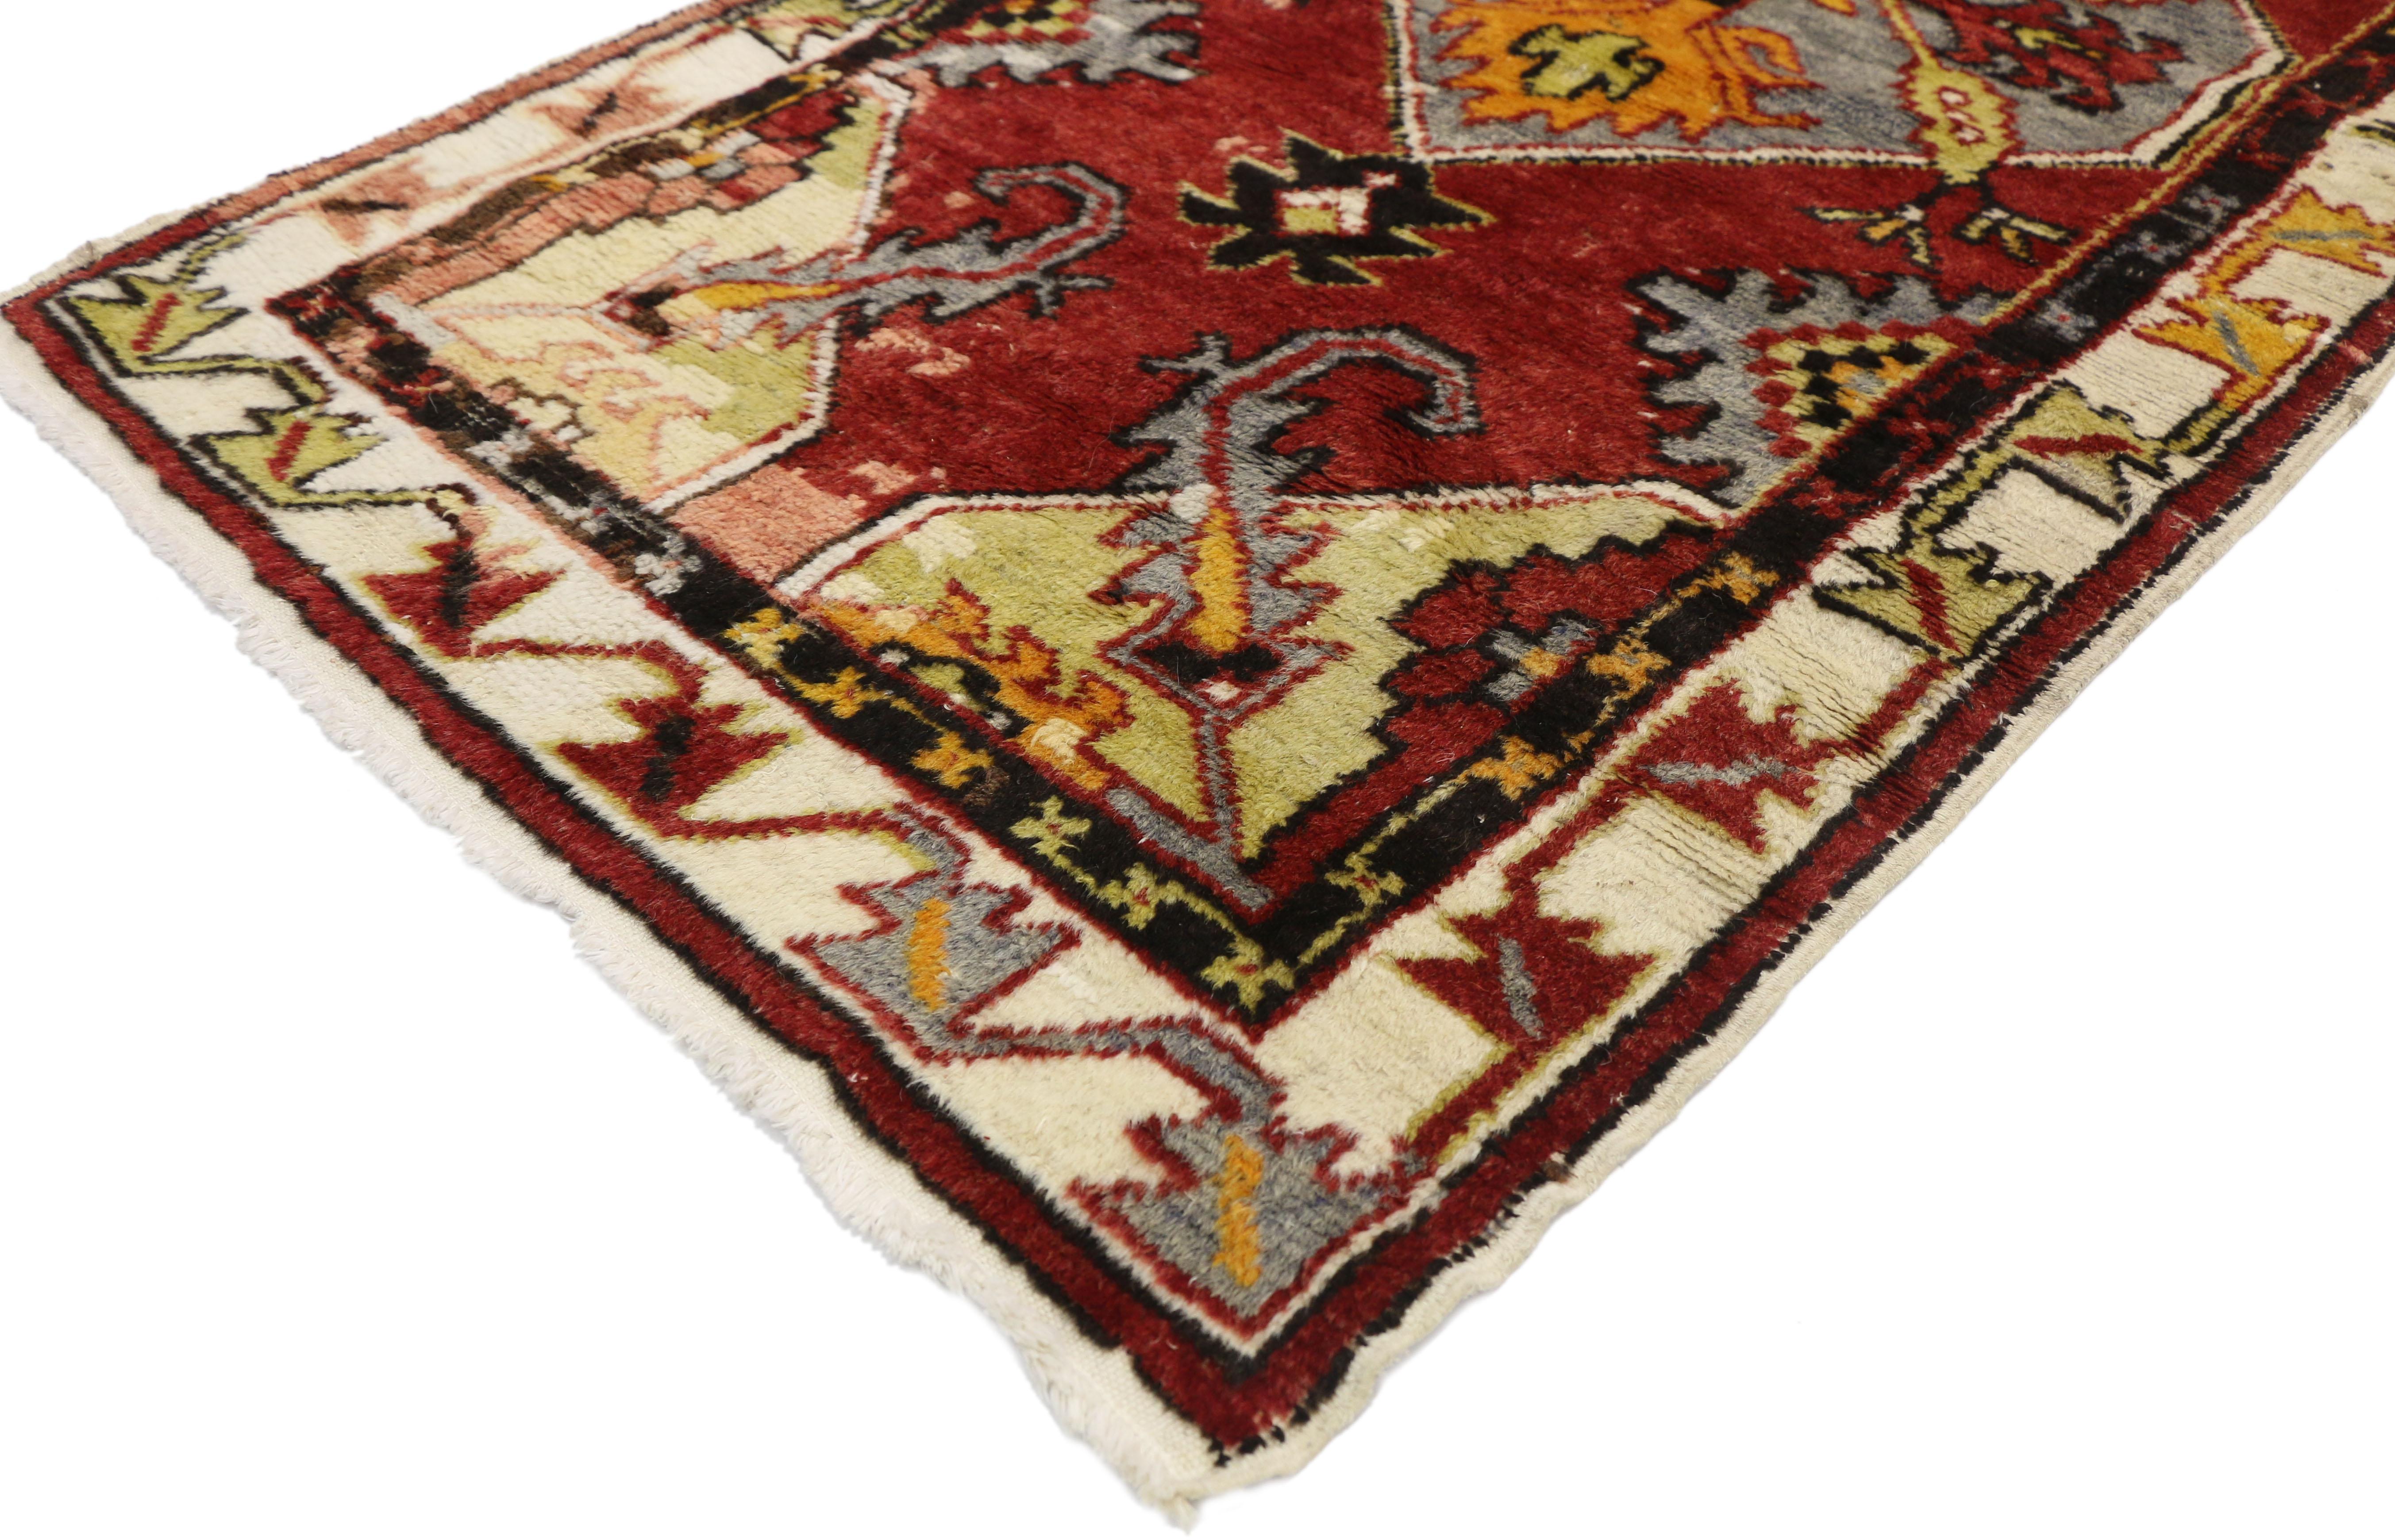 77279 vintage Turkish Oushak Hallway Runner with Artisan Tribal style. This hand knotted wool vintage Turkish Oushak hallway runner features three hexagonal medallions filled with angular botanical motifs and extending angular vines with palmettes